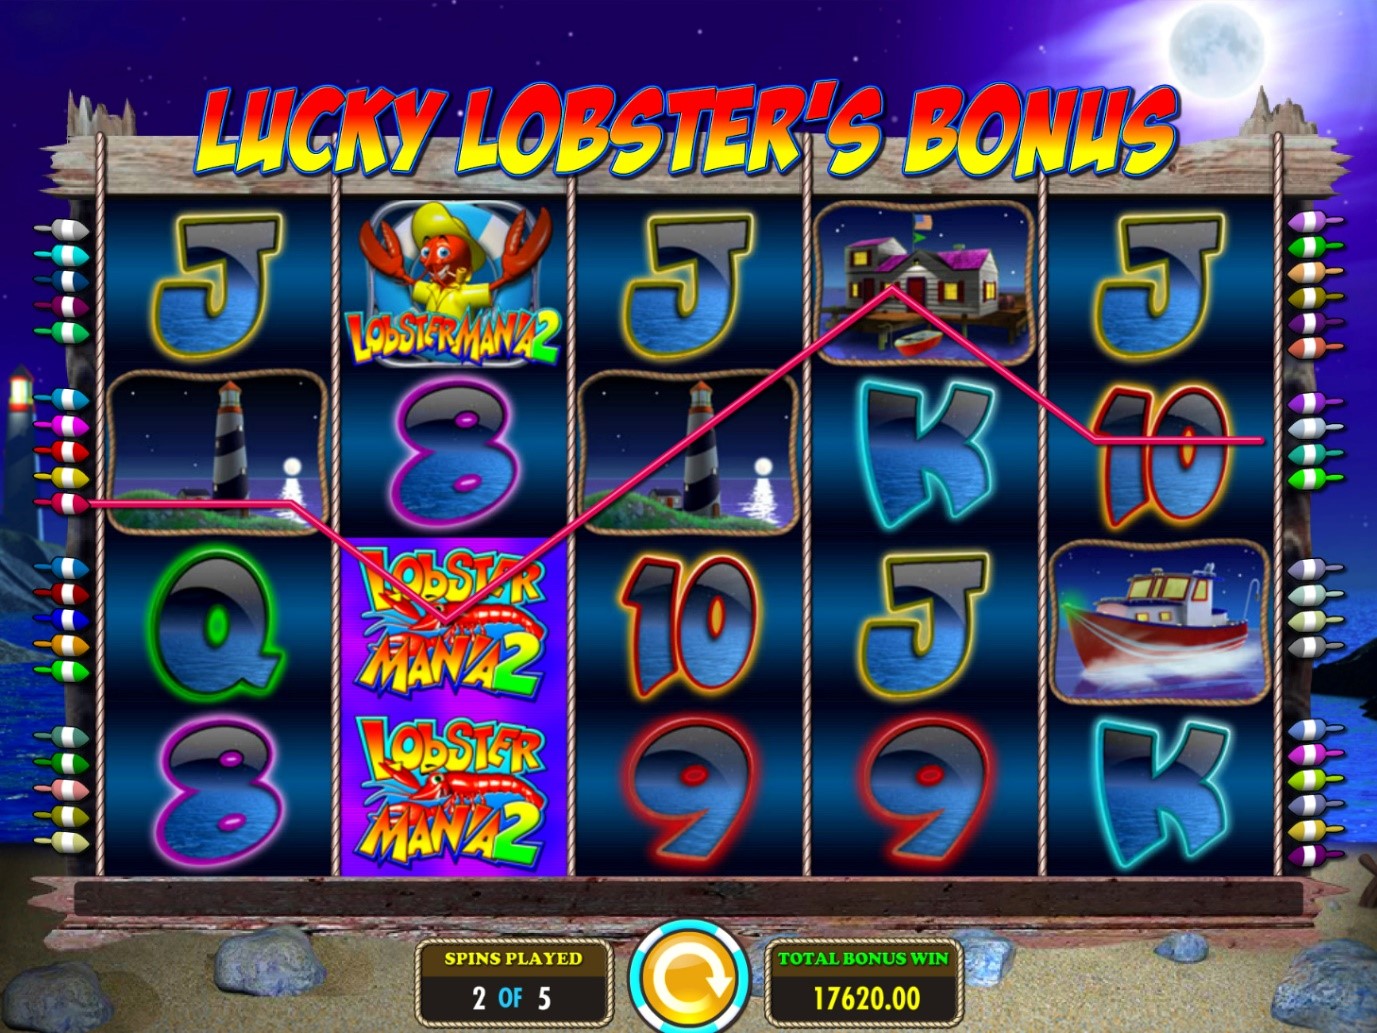 Free Spins game from IGT’s Lucky Larry’s Lobstermania 2 online slot game